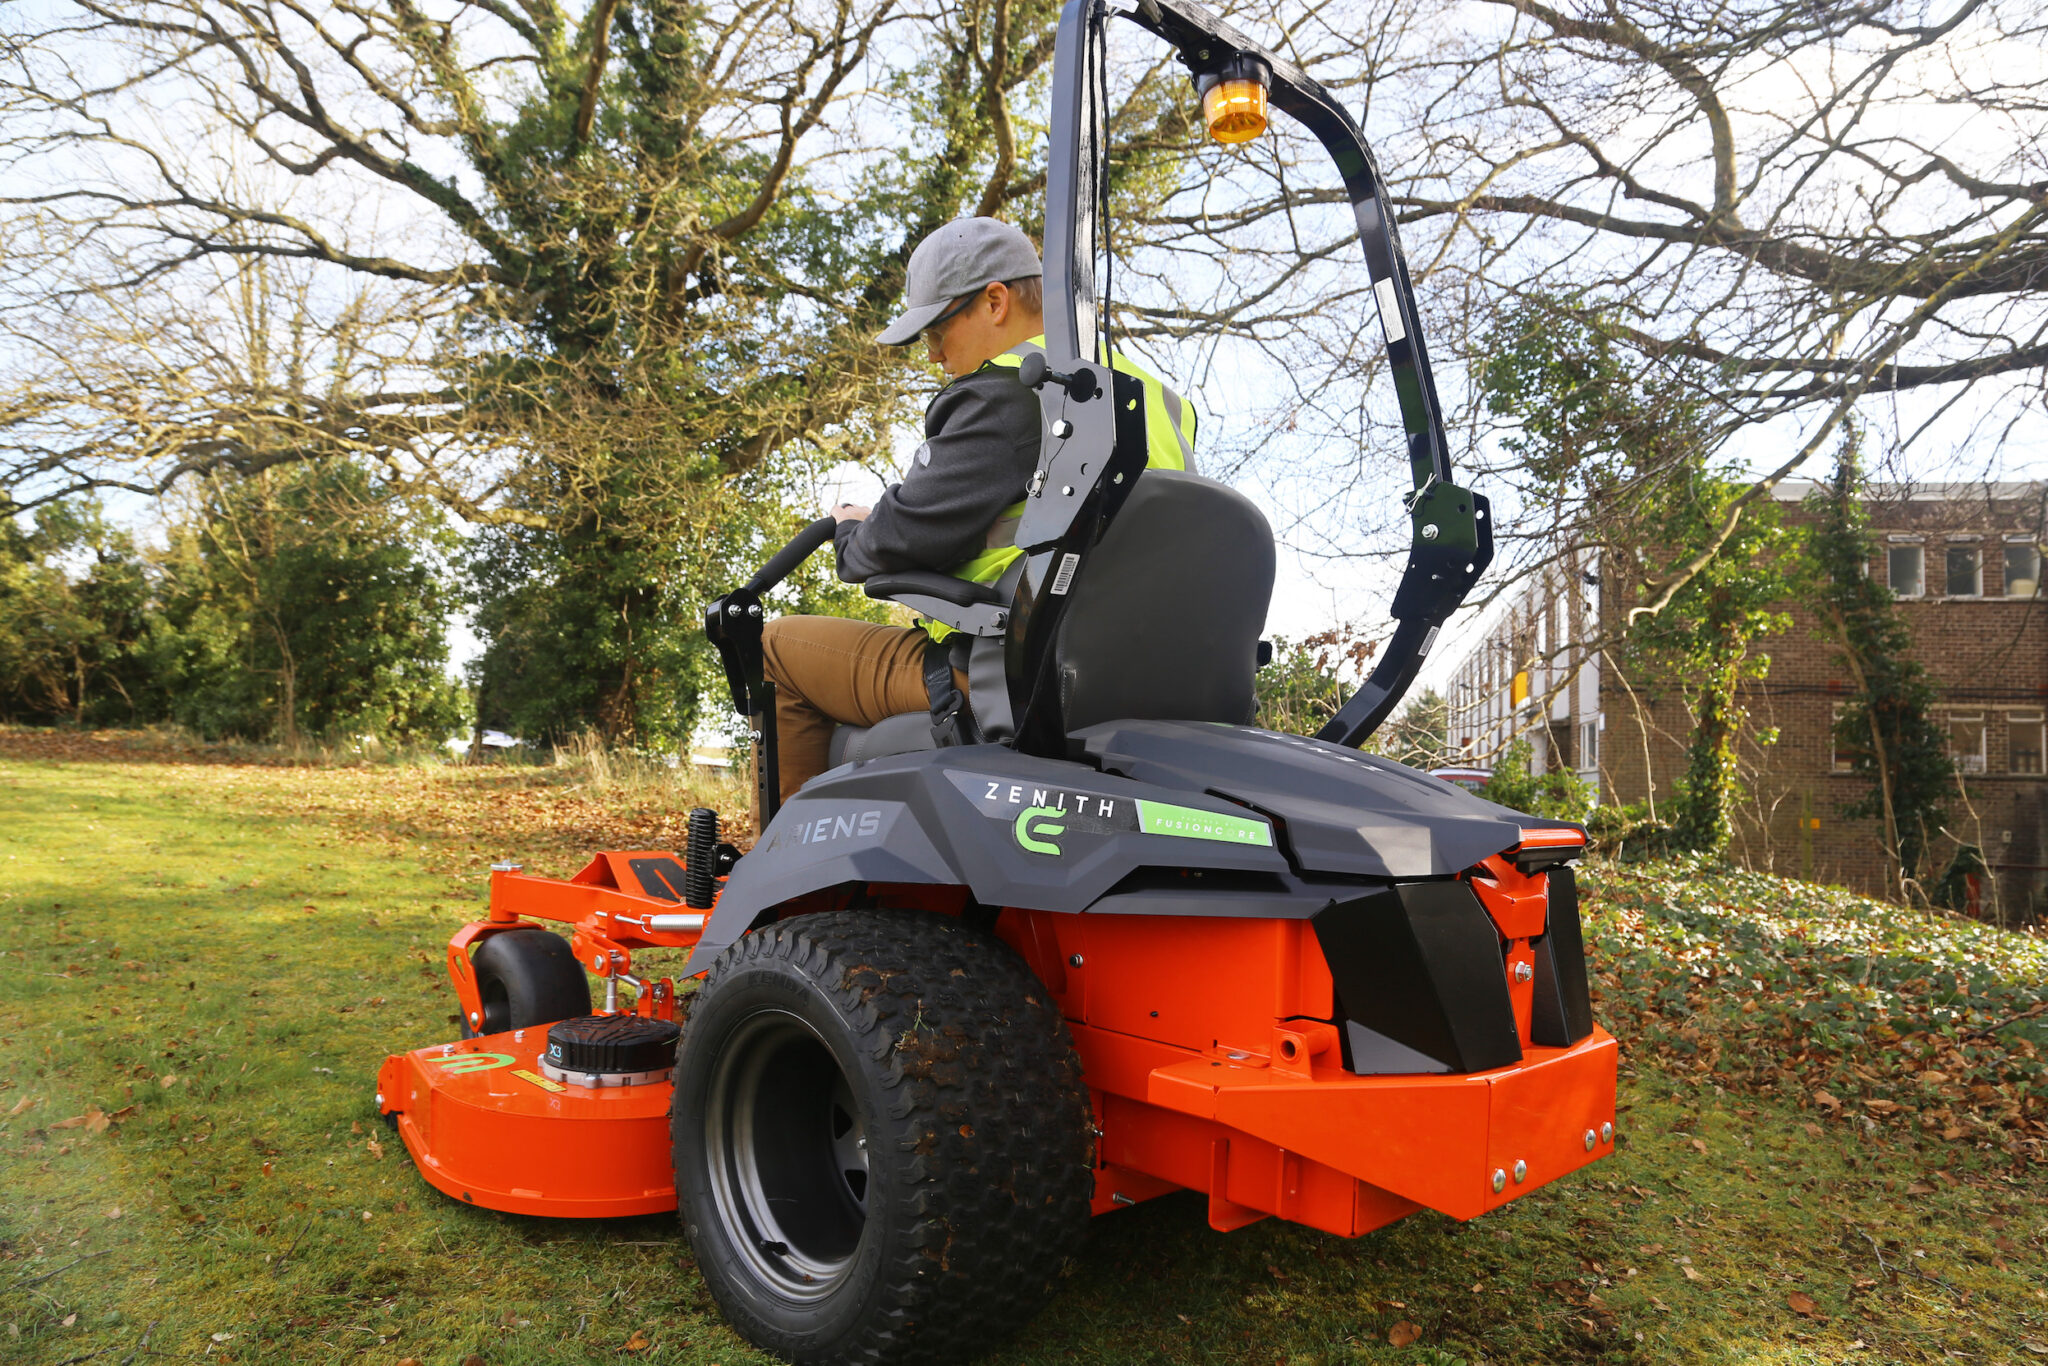 Grass cutting solutions from Ariens at SALTEX